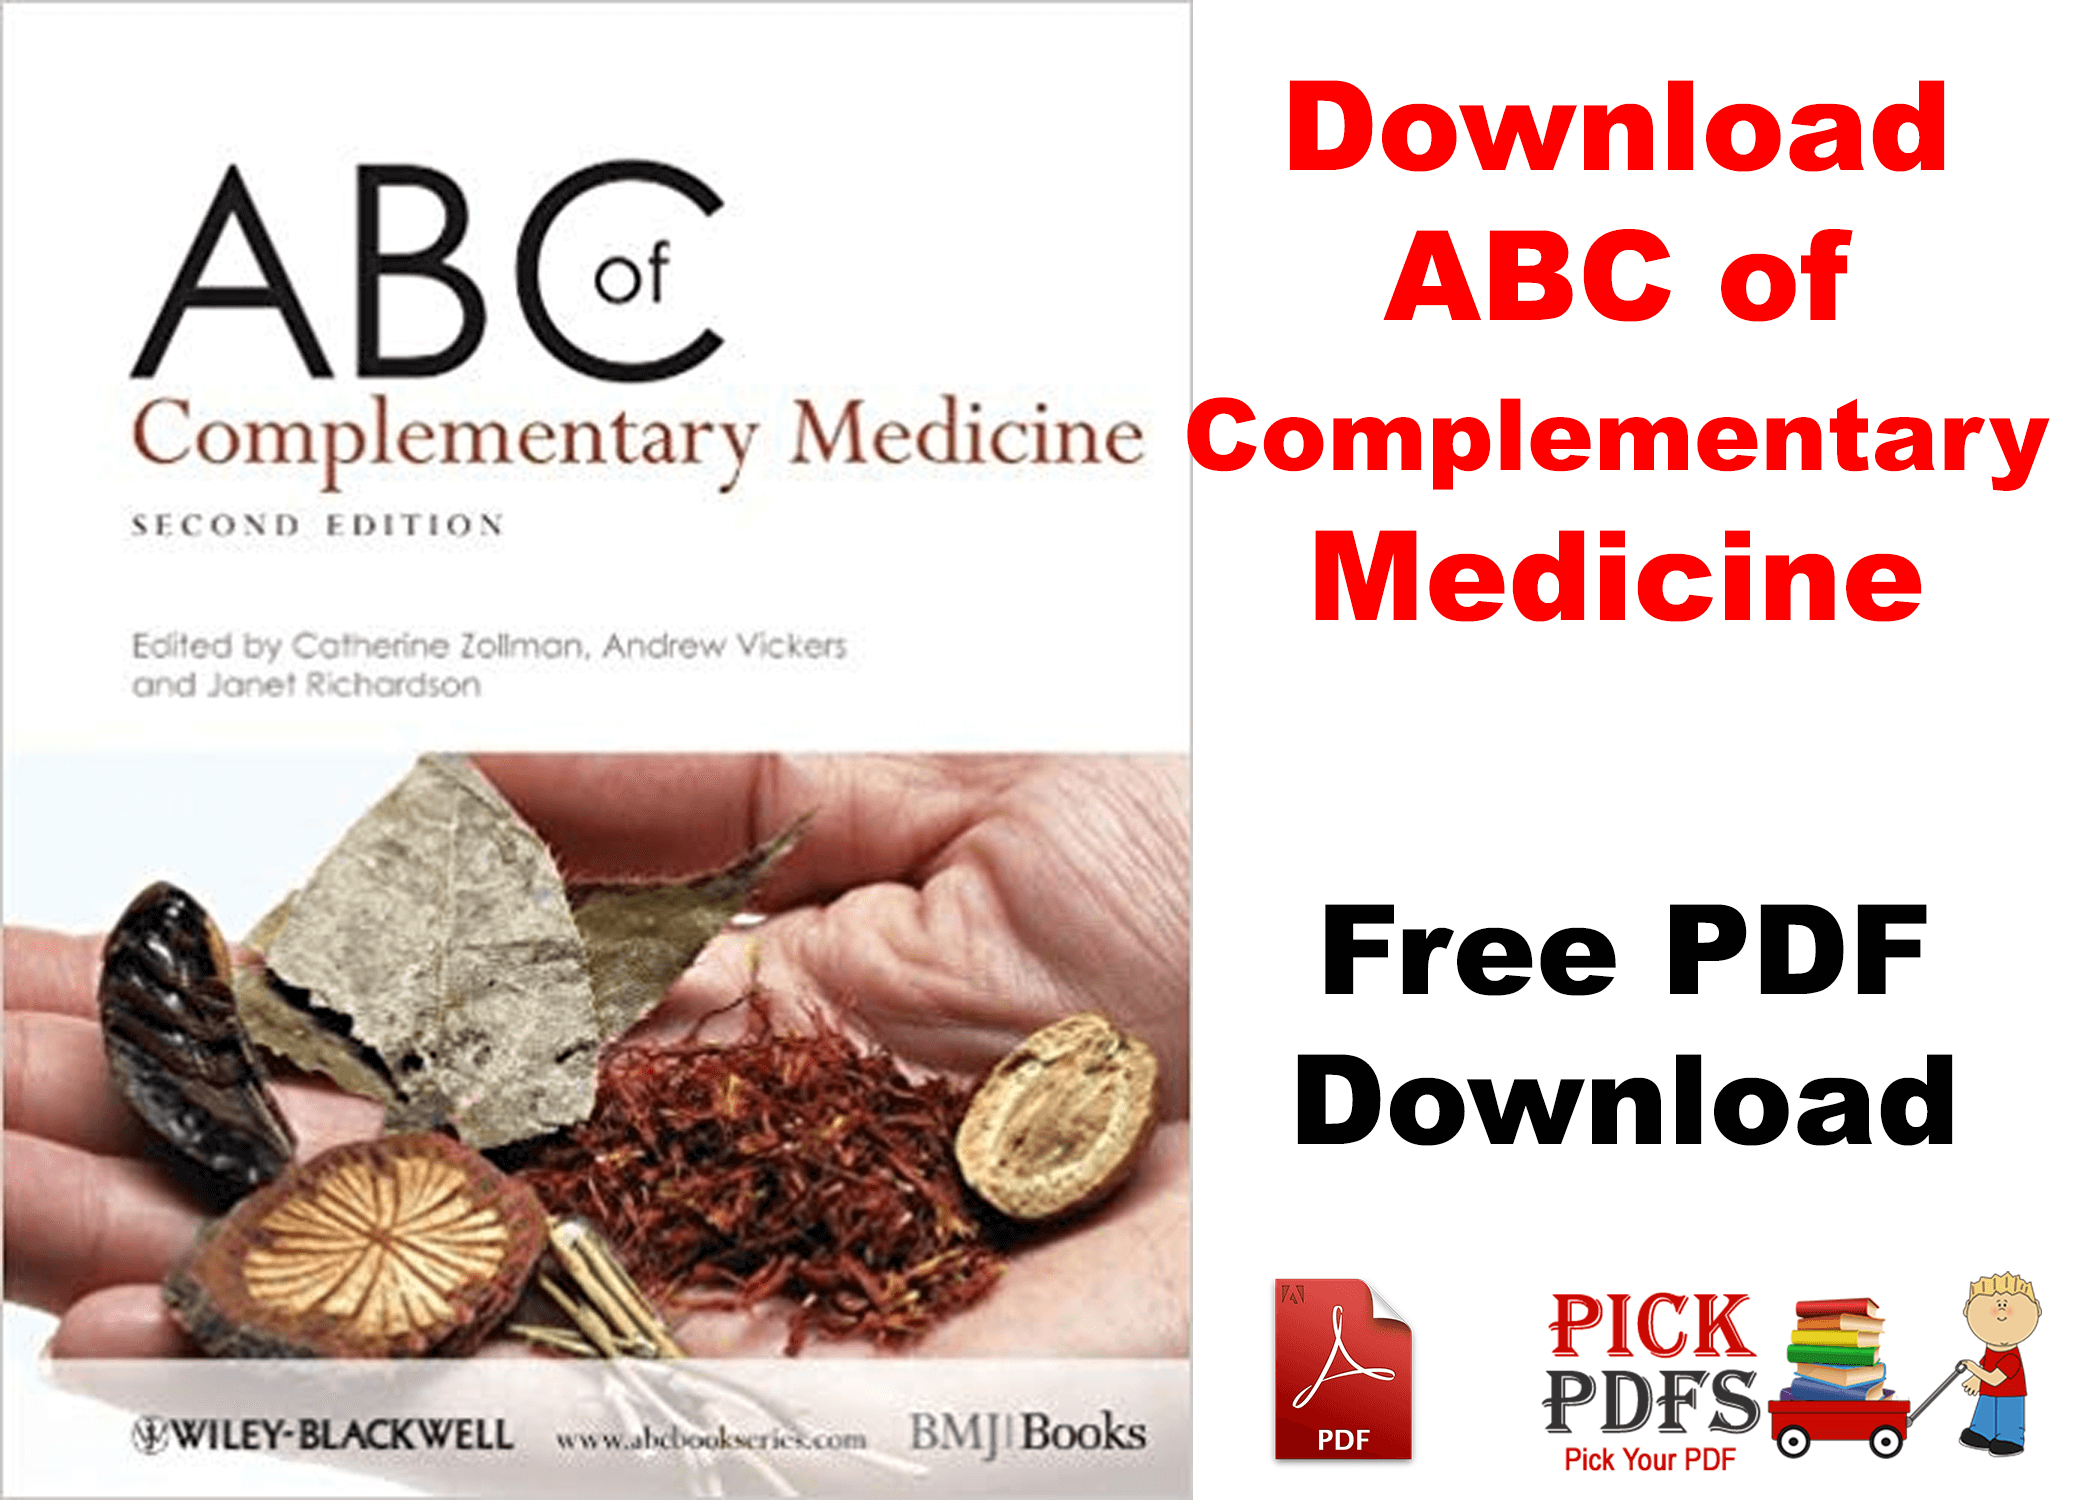 https://pickpdfs.com/abc-of-complementary-medicine-free-pdf-download-direct-link/